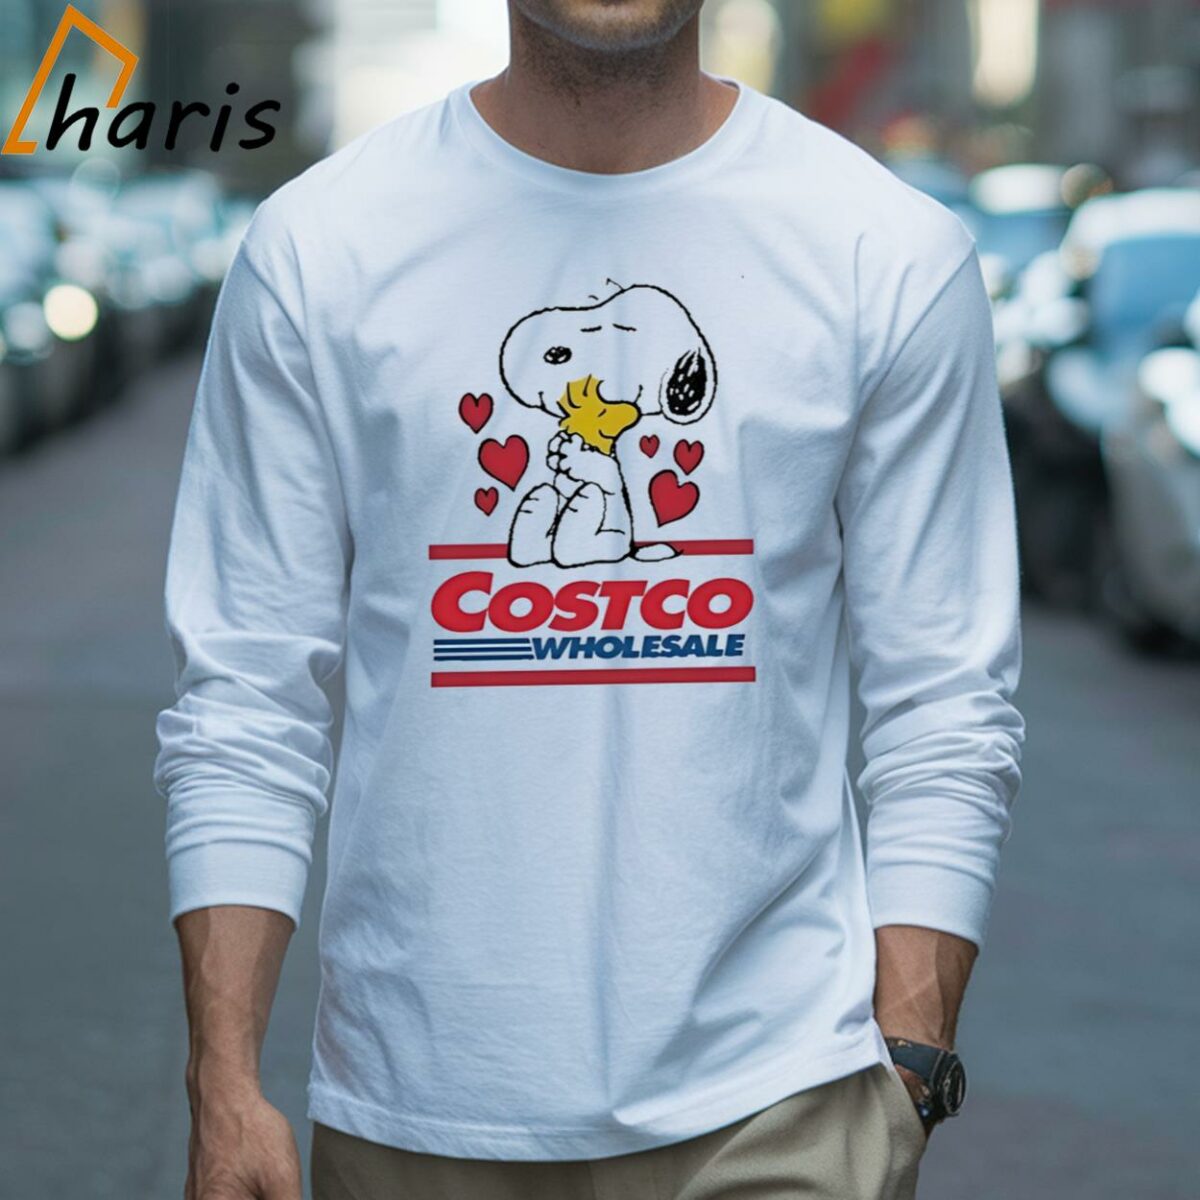 Snoopy And Woodstock Loves Costco Wholesale Logo T shirt 3 Long sleeve shirt